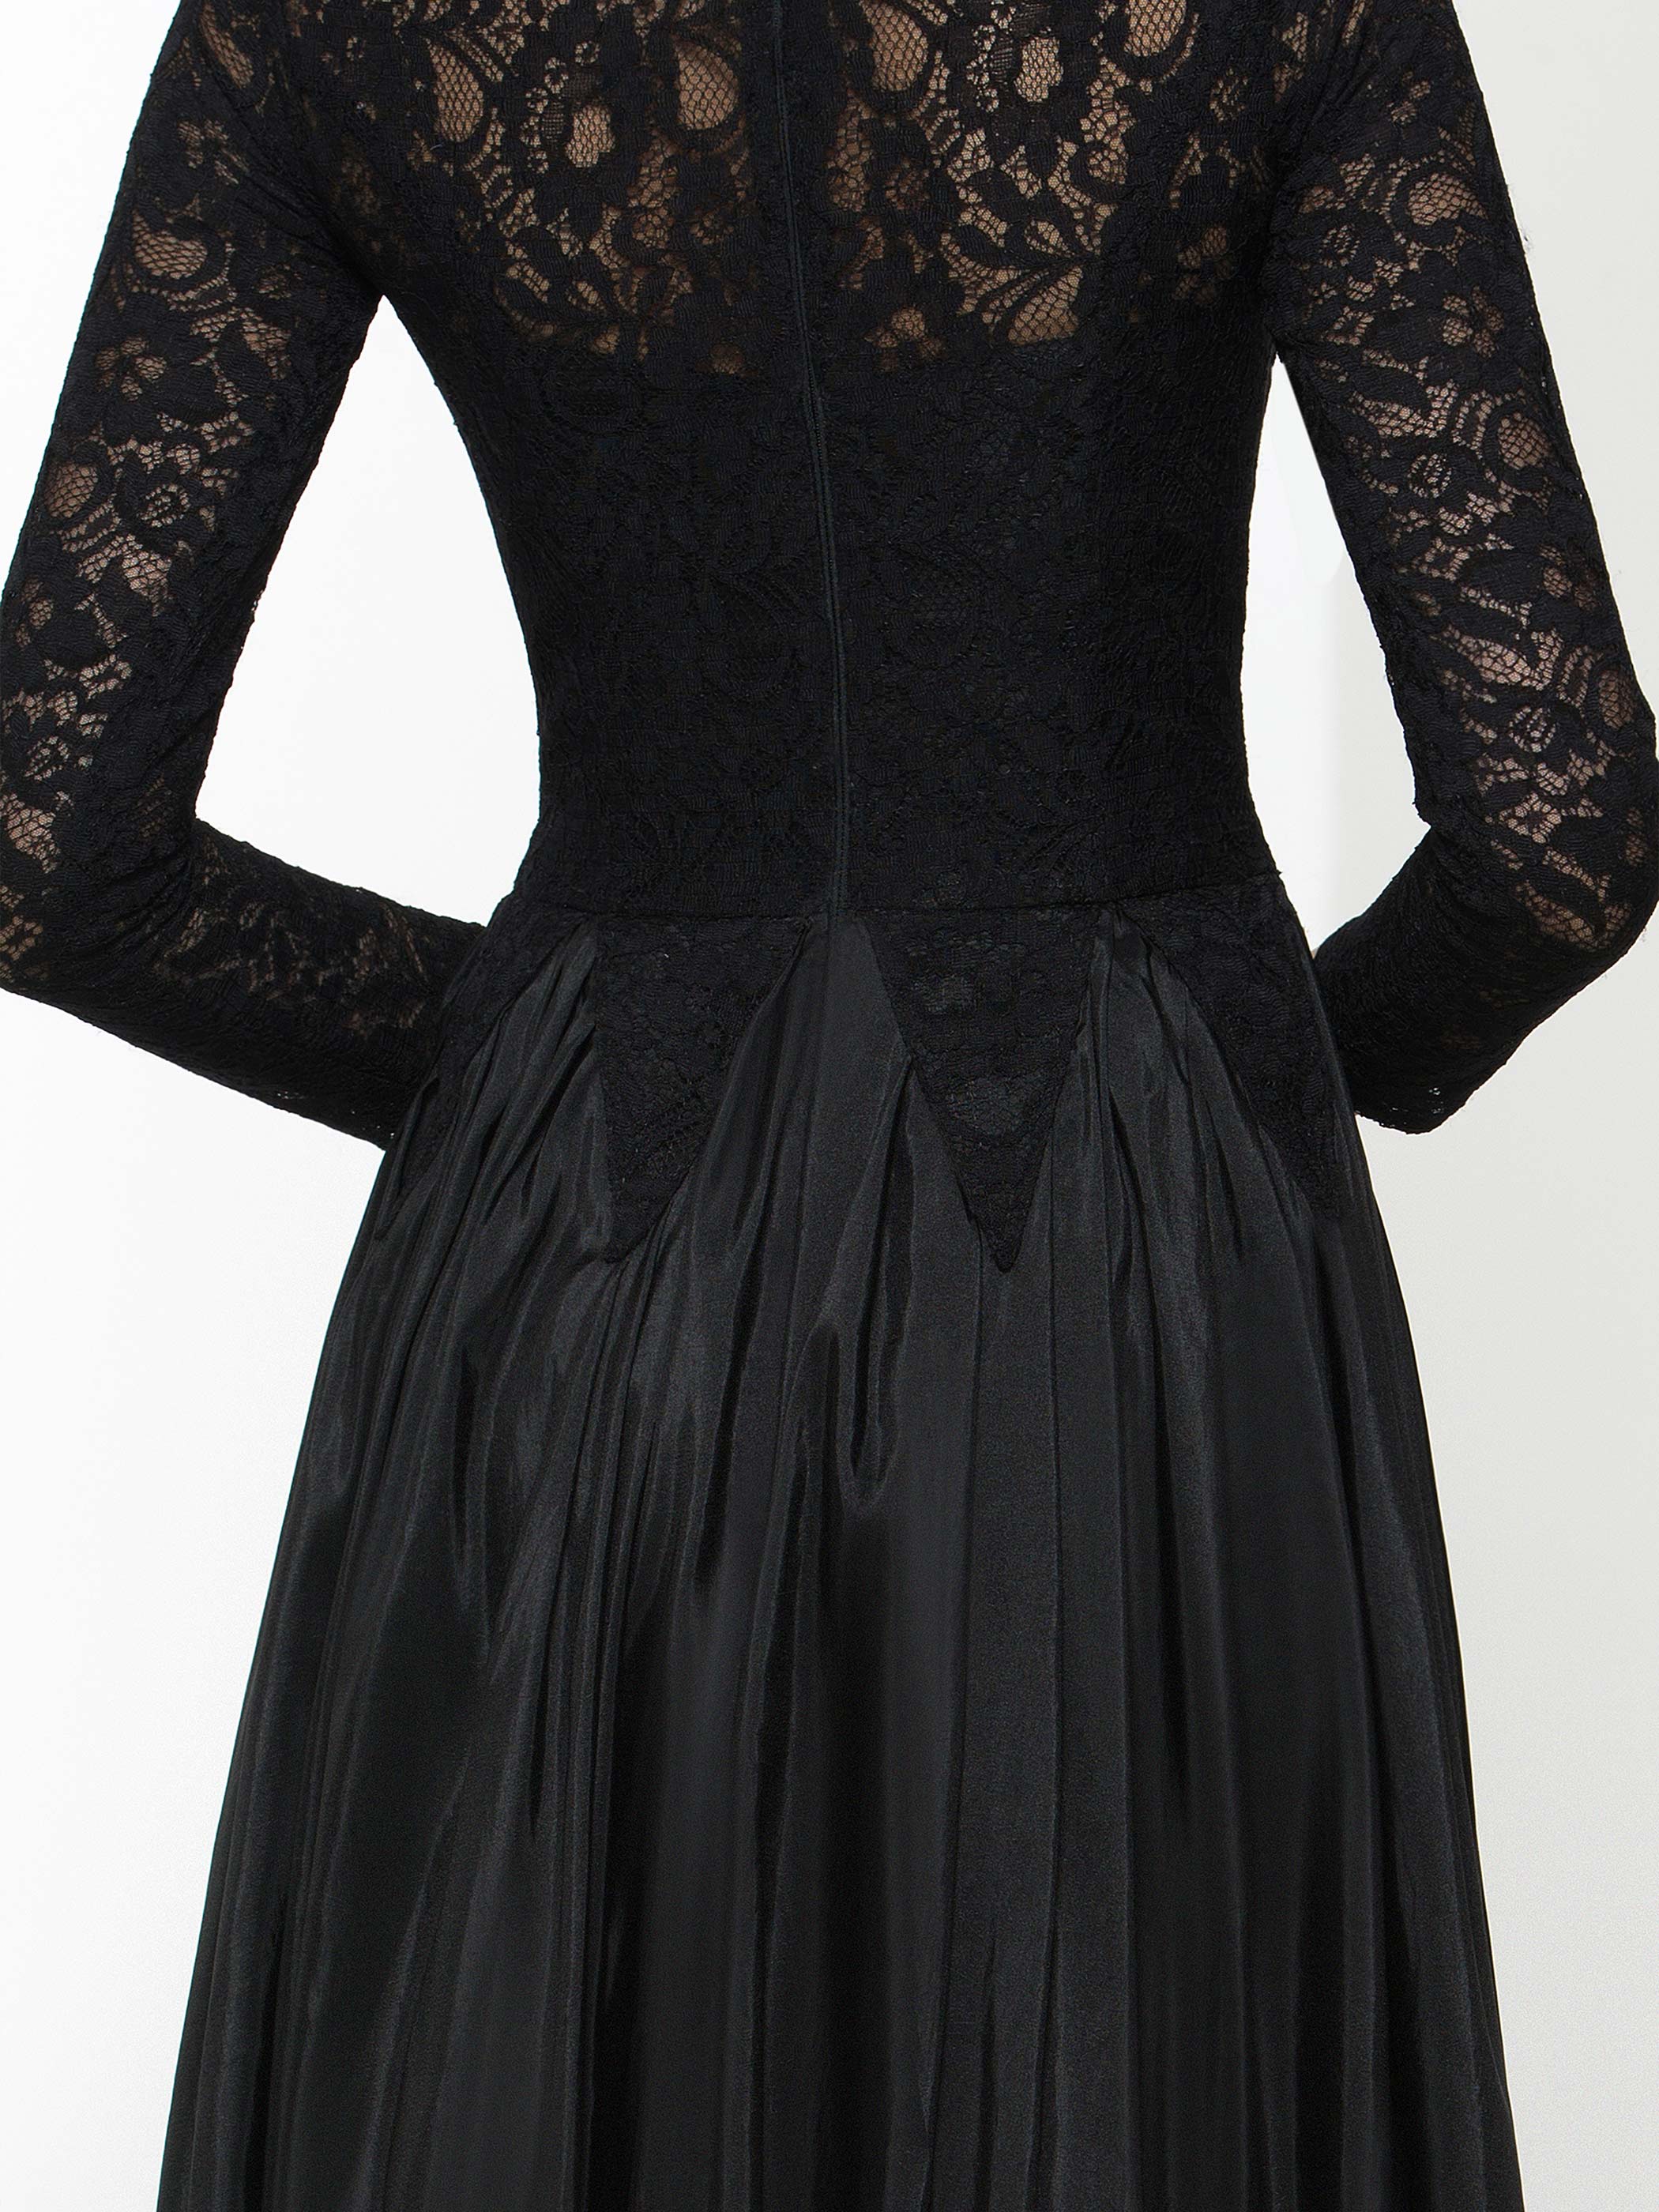 Ericdress V-Neck 3/4 Length Sleeves Lace Evening Dress